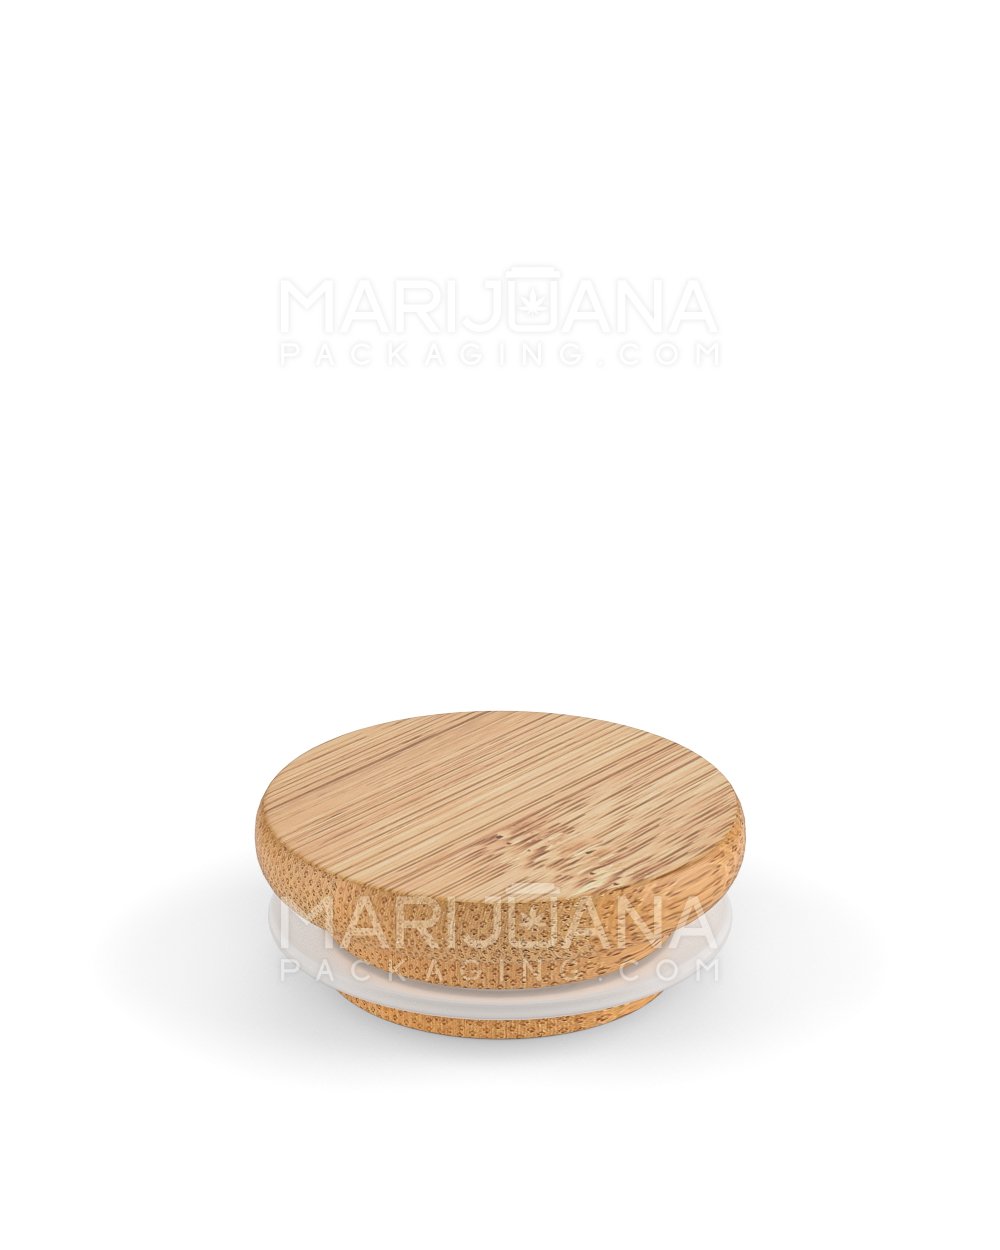 Glass Jar with Wooden Lid | 4oz - 32 Dram - 120 Count - 11